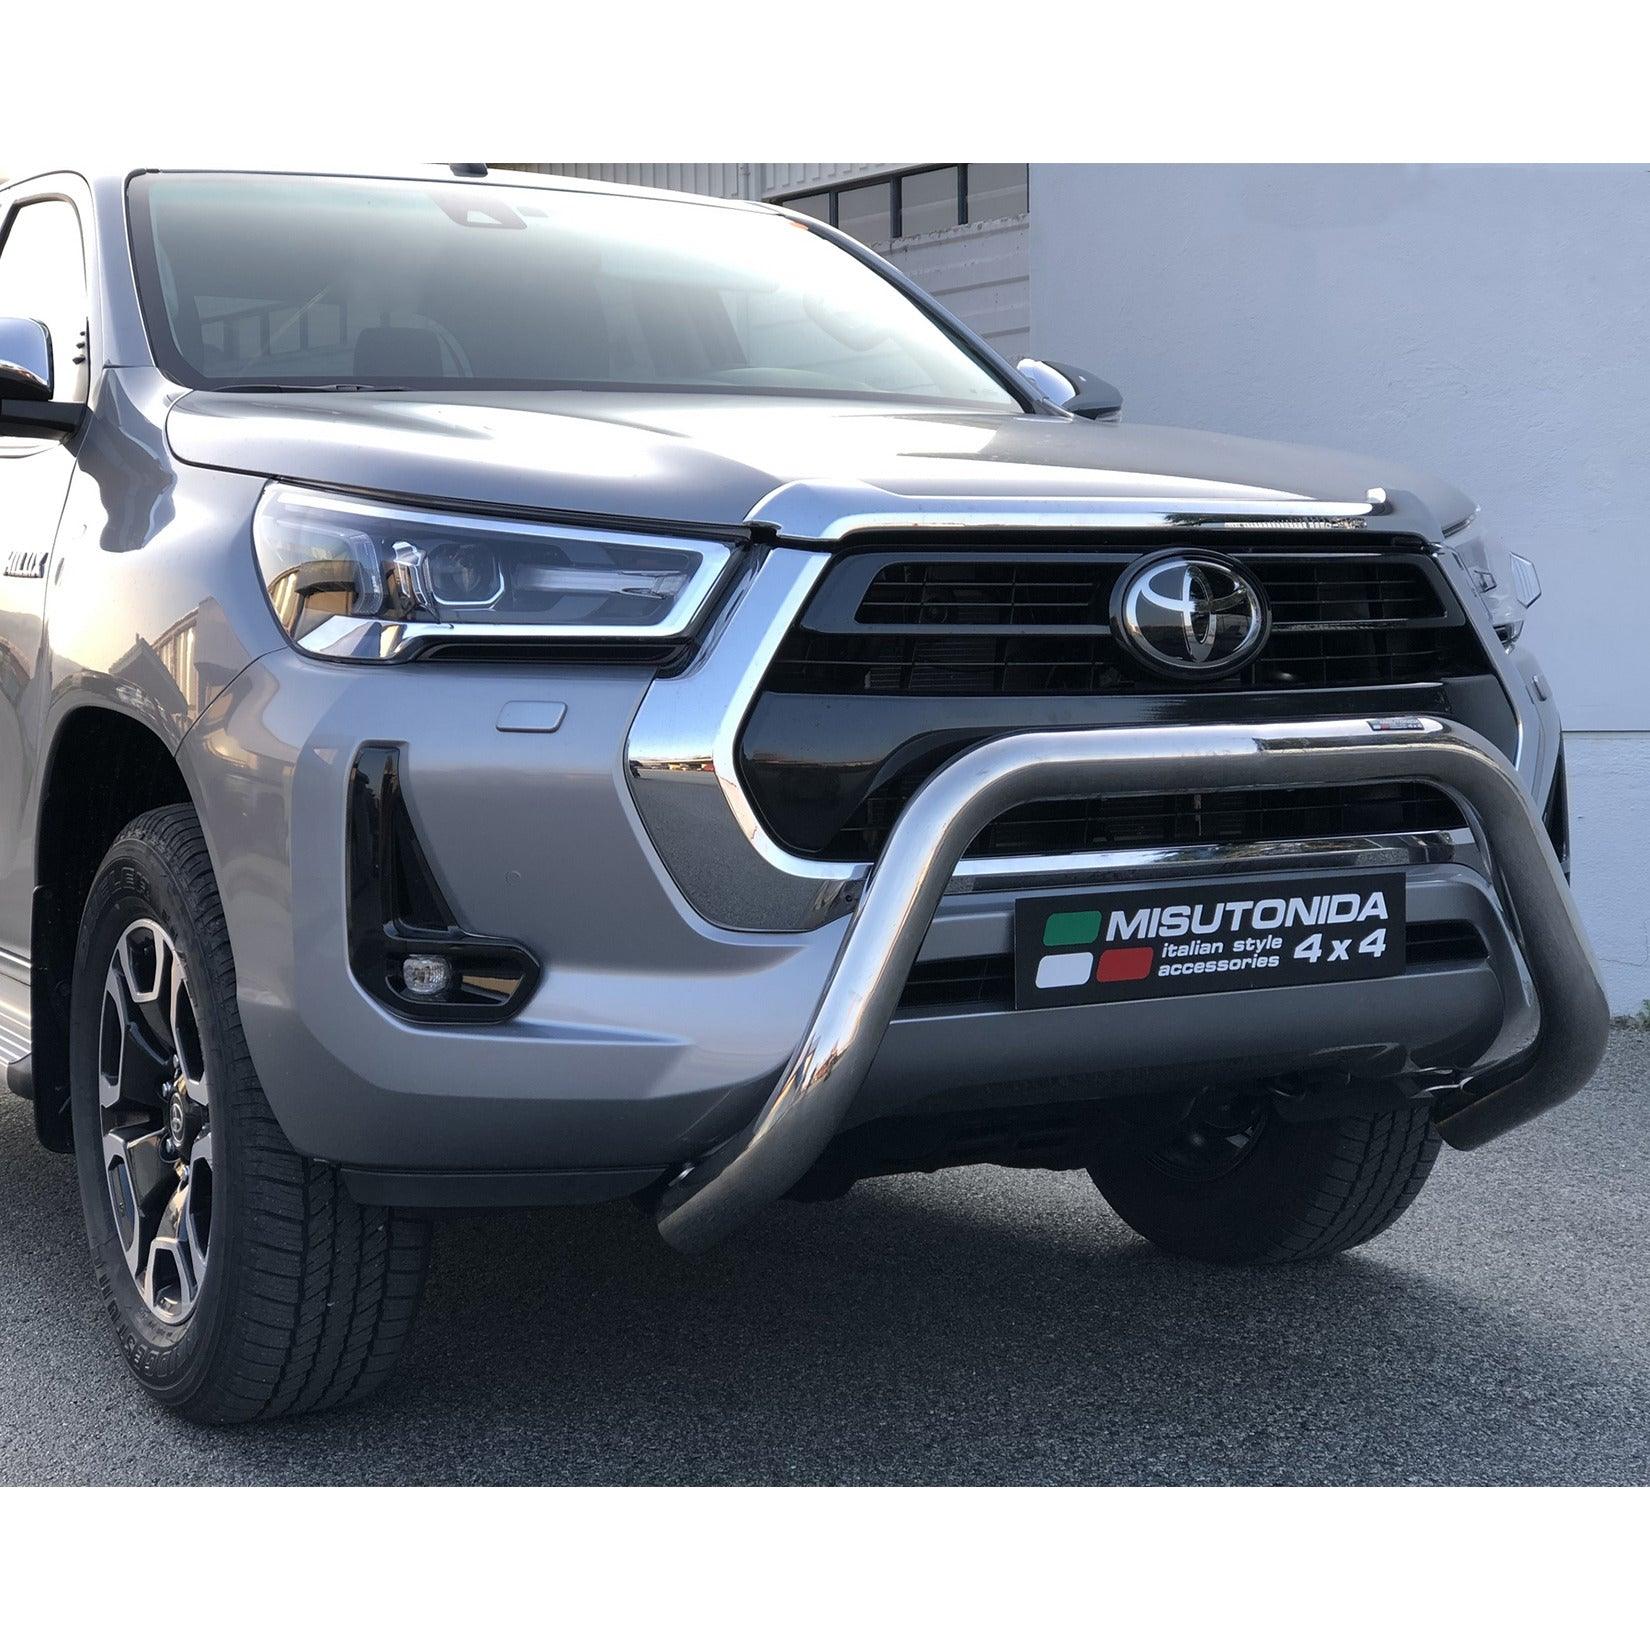 TOYOTA HILUX 2020 ON – MISUTONIDA EU APPROVED FRONT A BAR – 76MM – STAINLESS FINISH - Storm Xccessories2